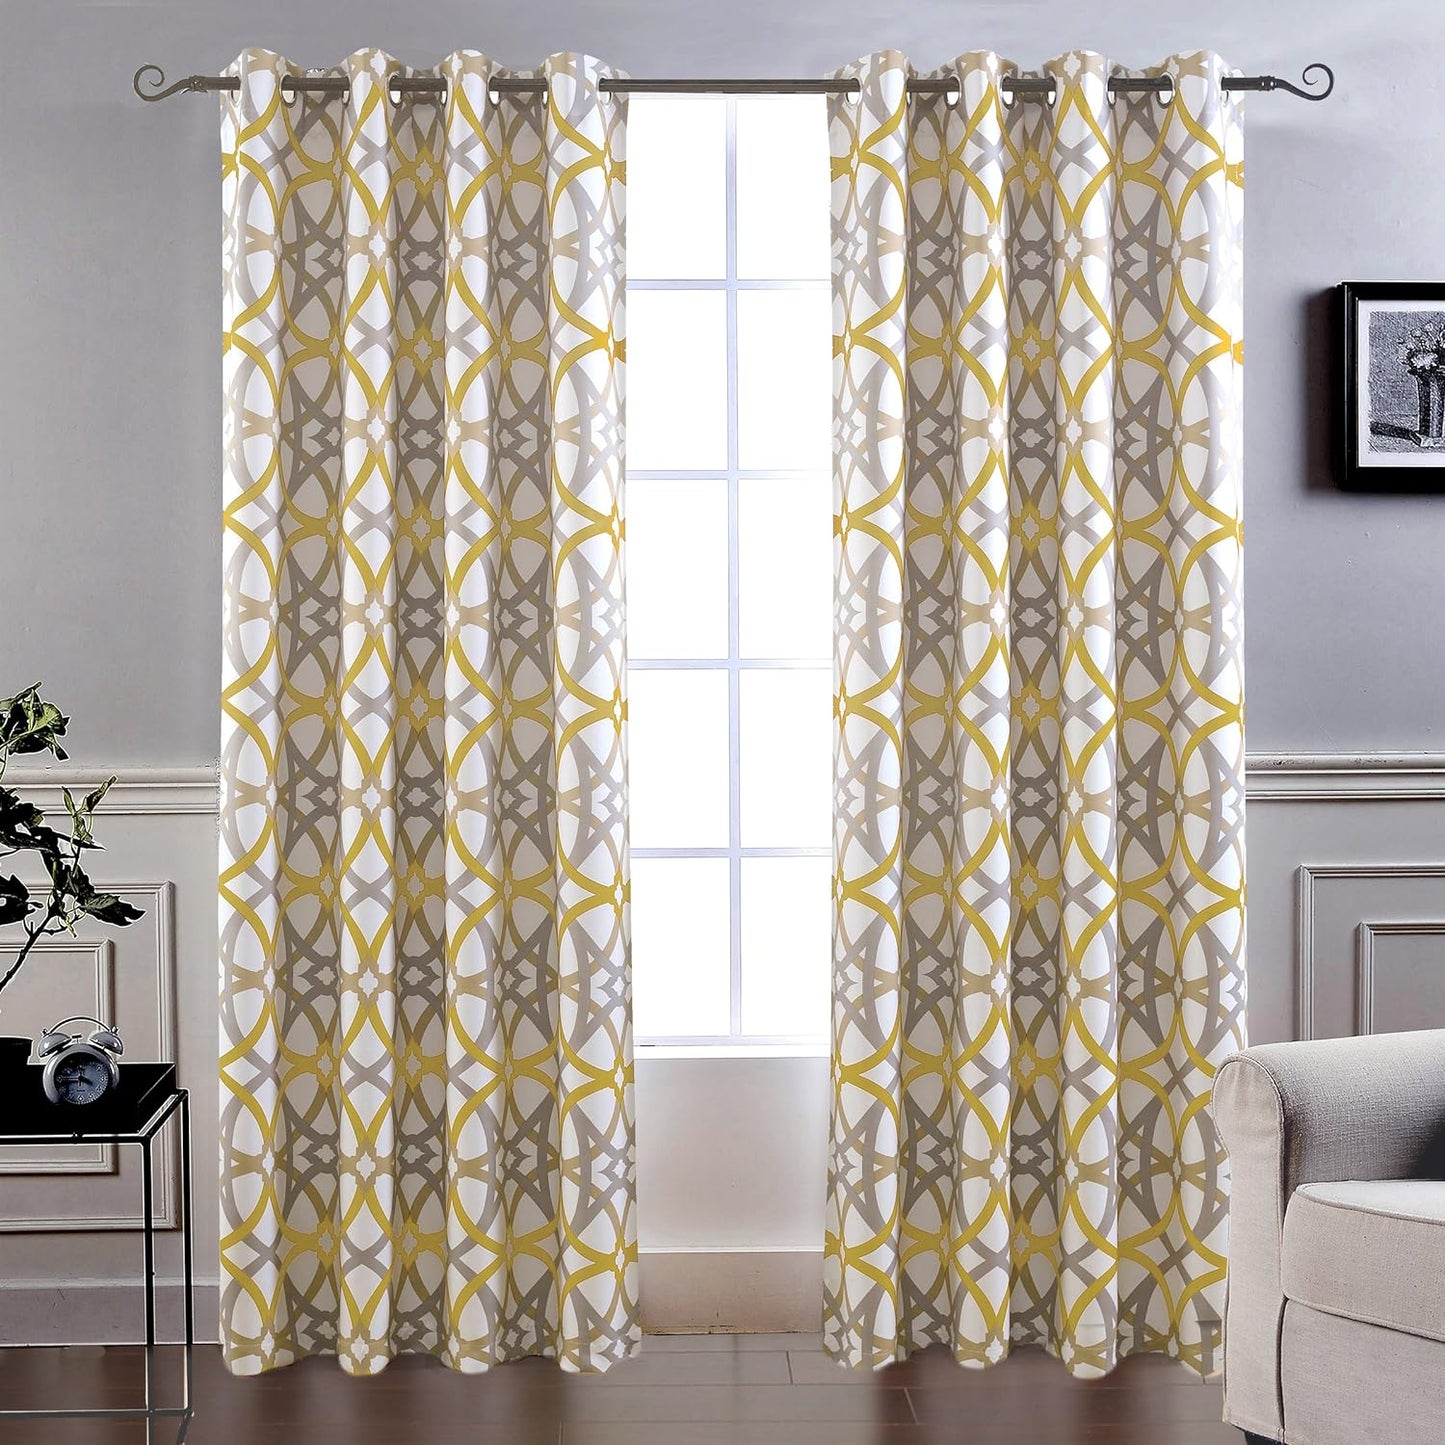 Driftaway Alexander Thermal Blackout Grommet Unlined Window Curtains Spiral Geo Trellis Pattern Set of 2 Panels Each Size 52 Inch by 84 Inch Red and Gray  DriftAway Golden Yellow/Gray 52"X84" 